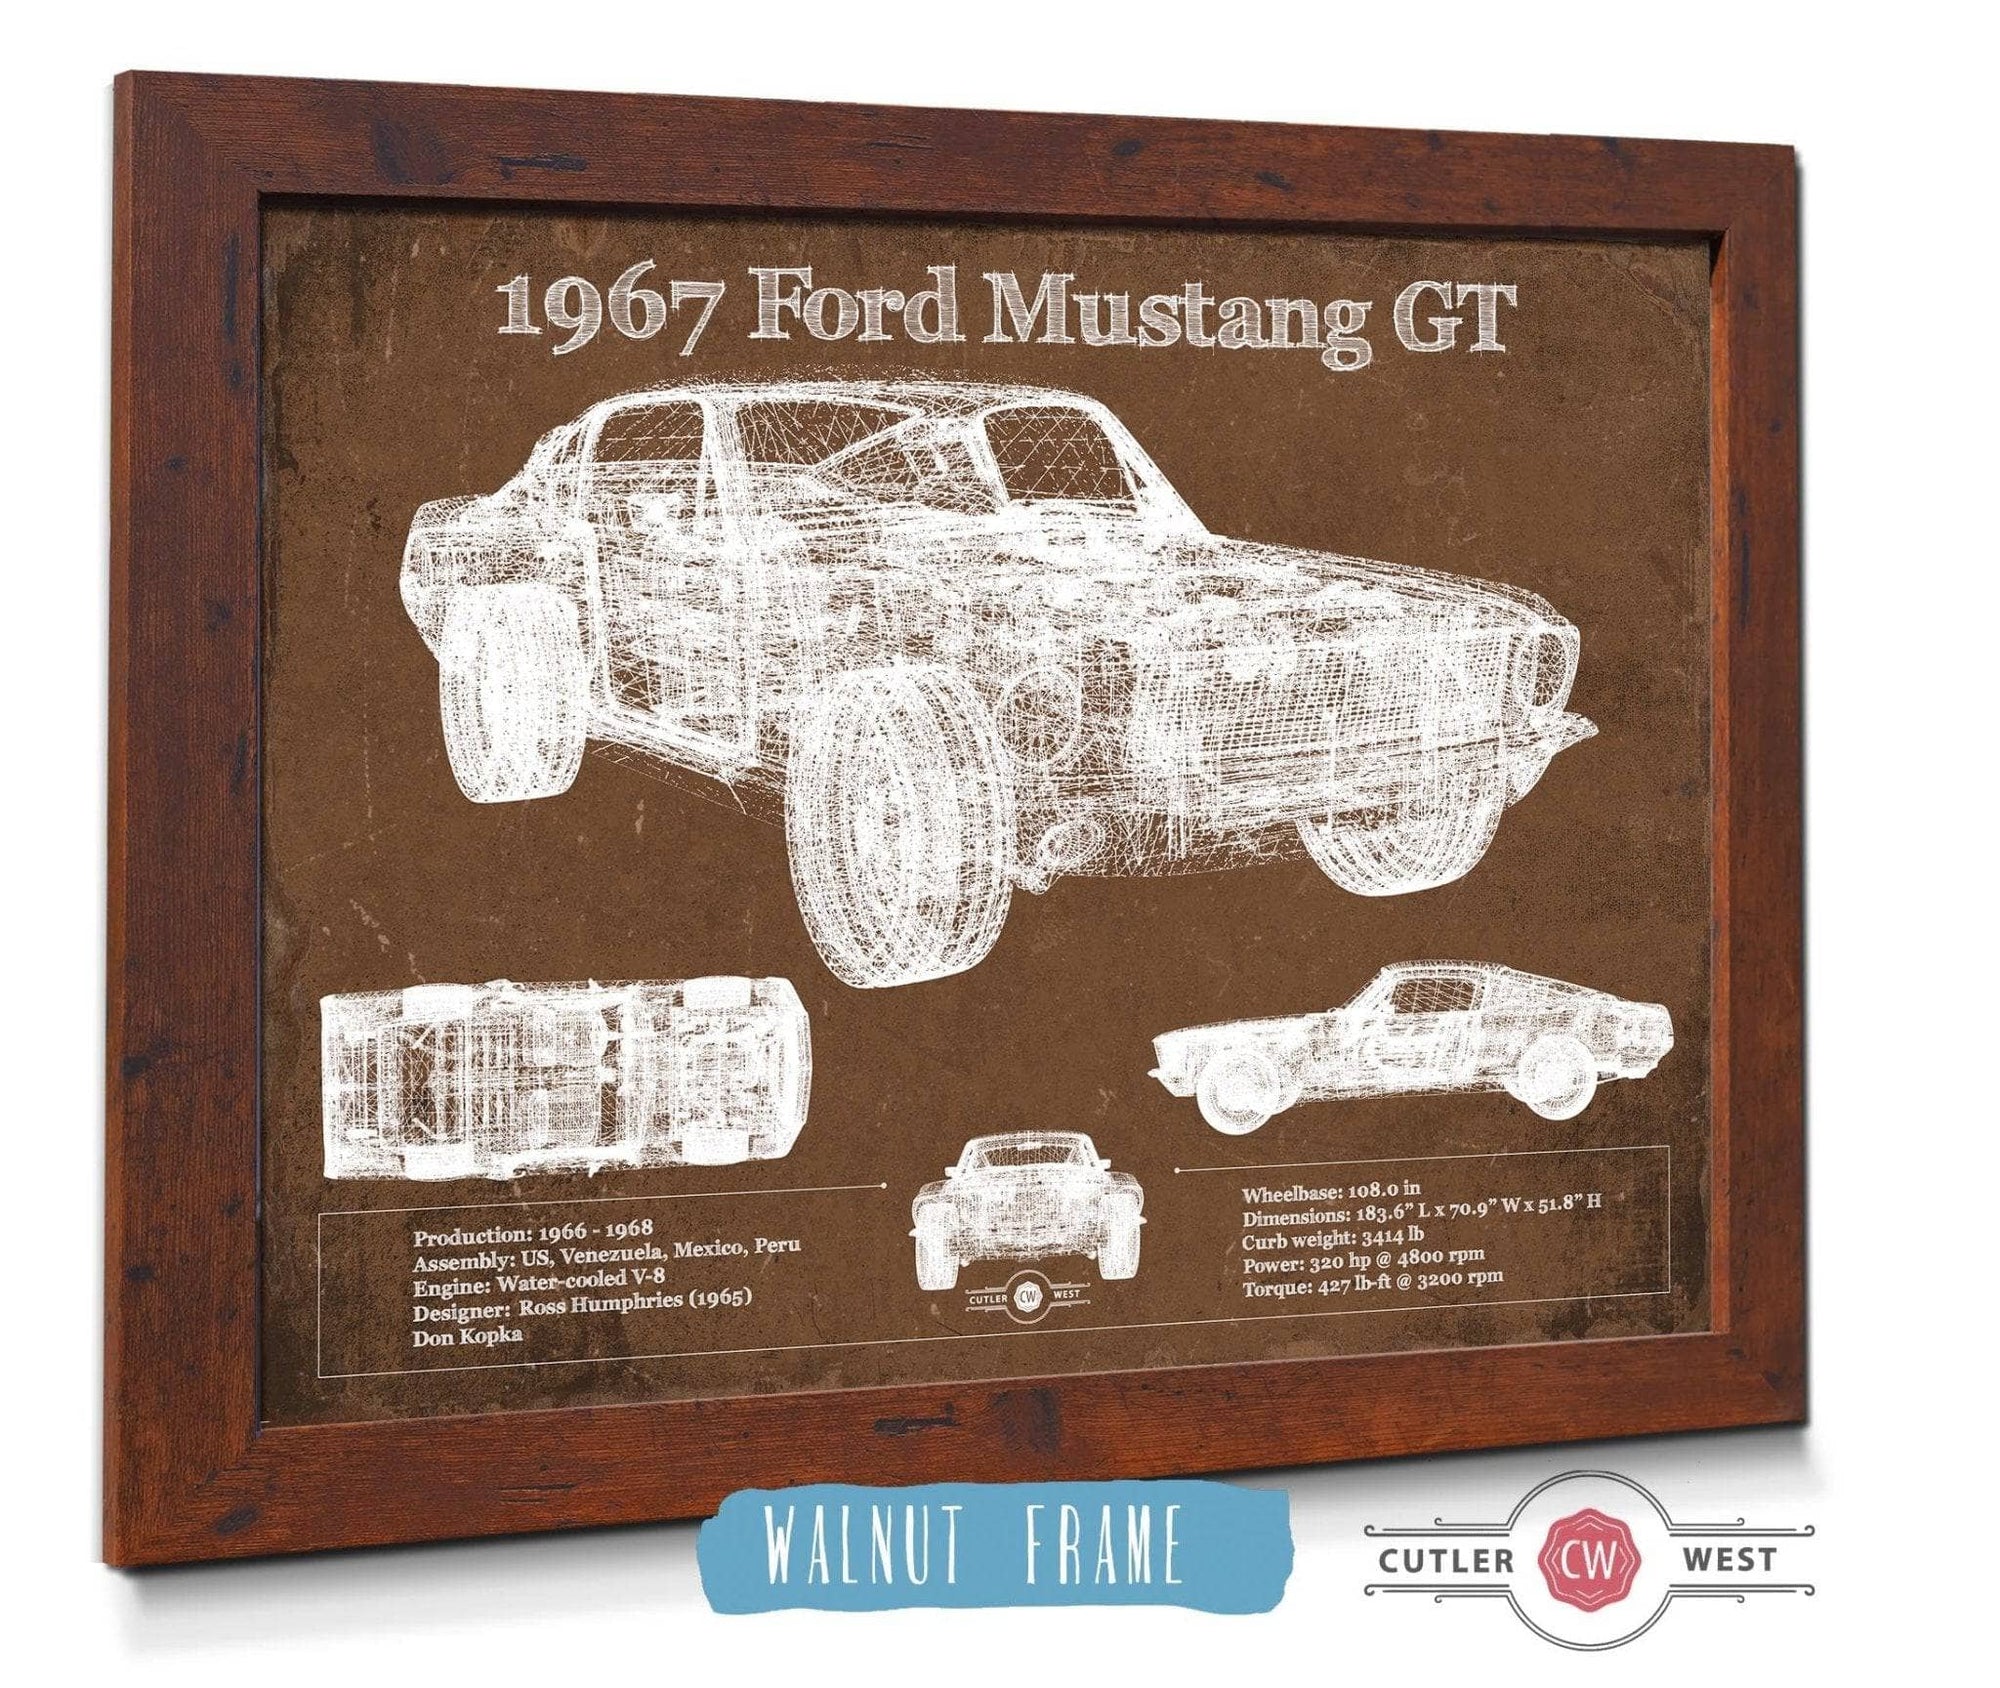 Cutler West Ford Collection 14" x 11" / Walnut Frame 1967 Ford Mustang GT Blueprint Vintage Auto Print 933350035_34089